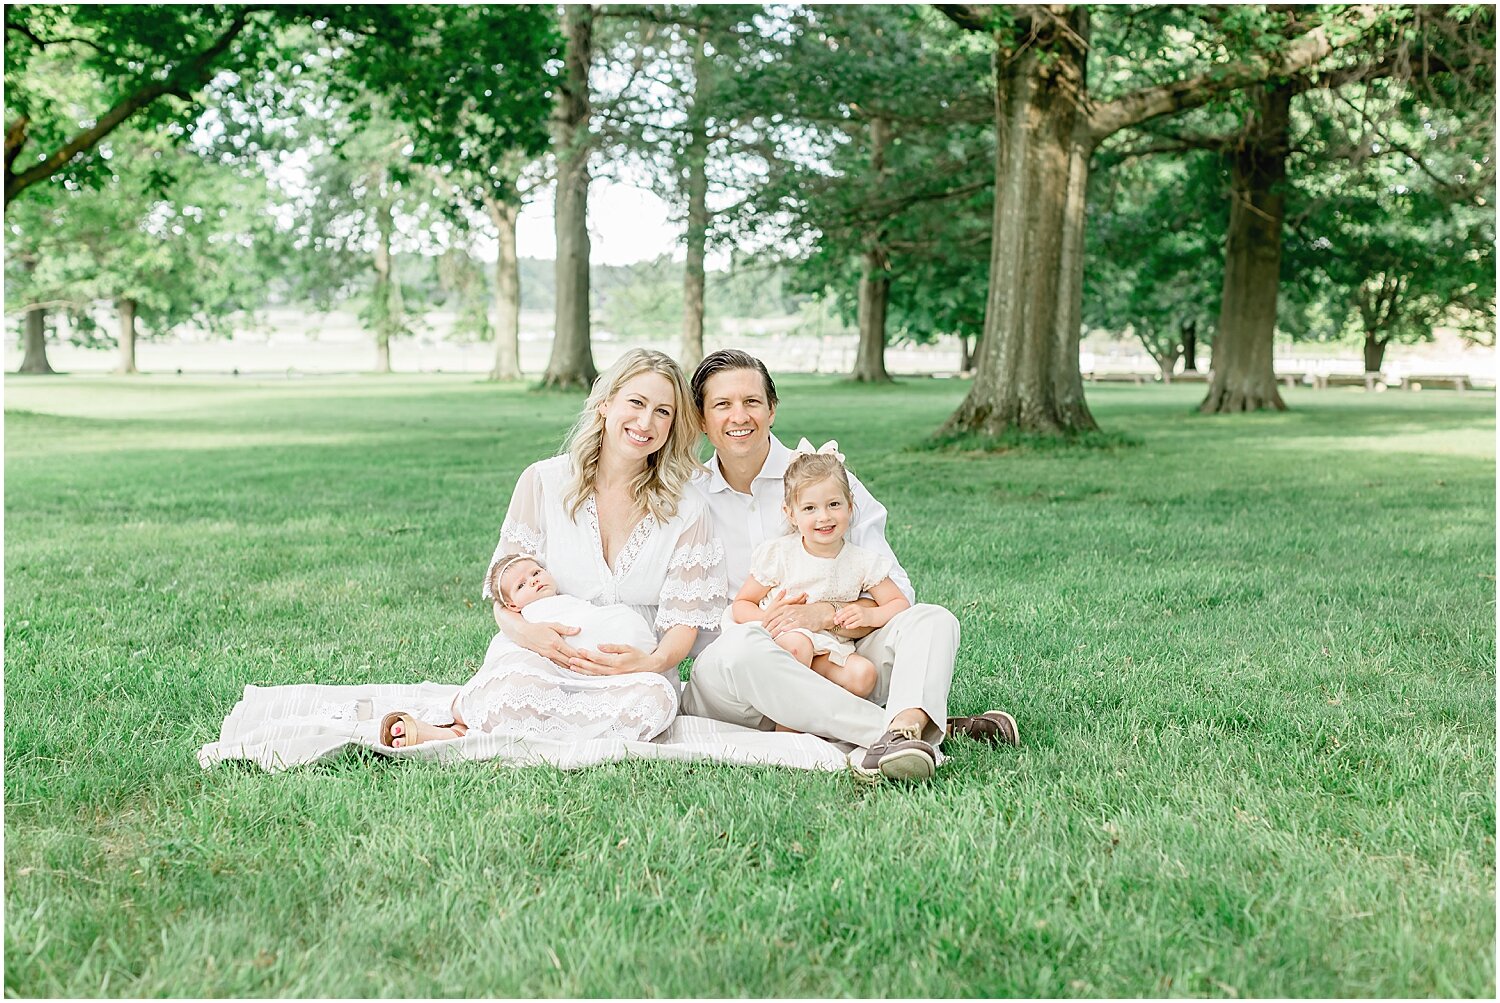 Outdoor newborn session at Sherwood Island Park. Photos by Kristin Wood Photography. 